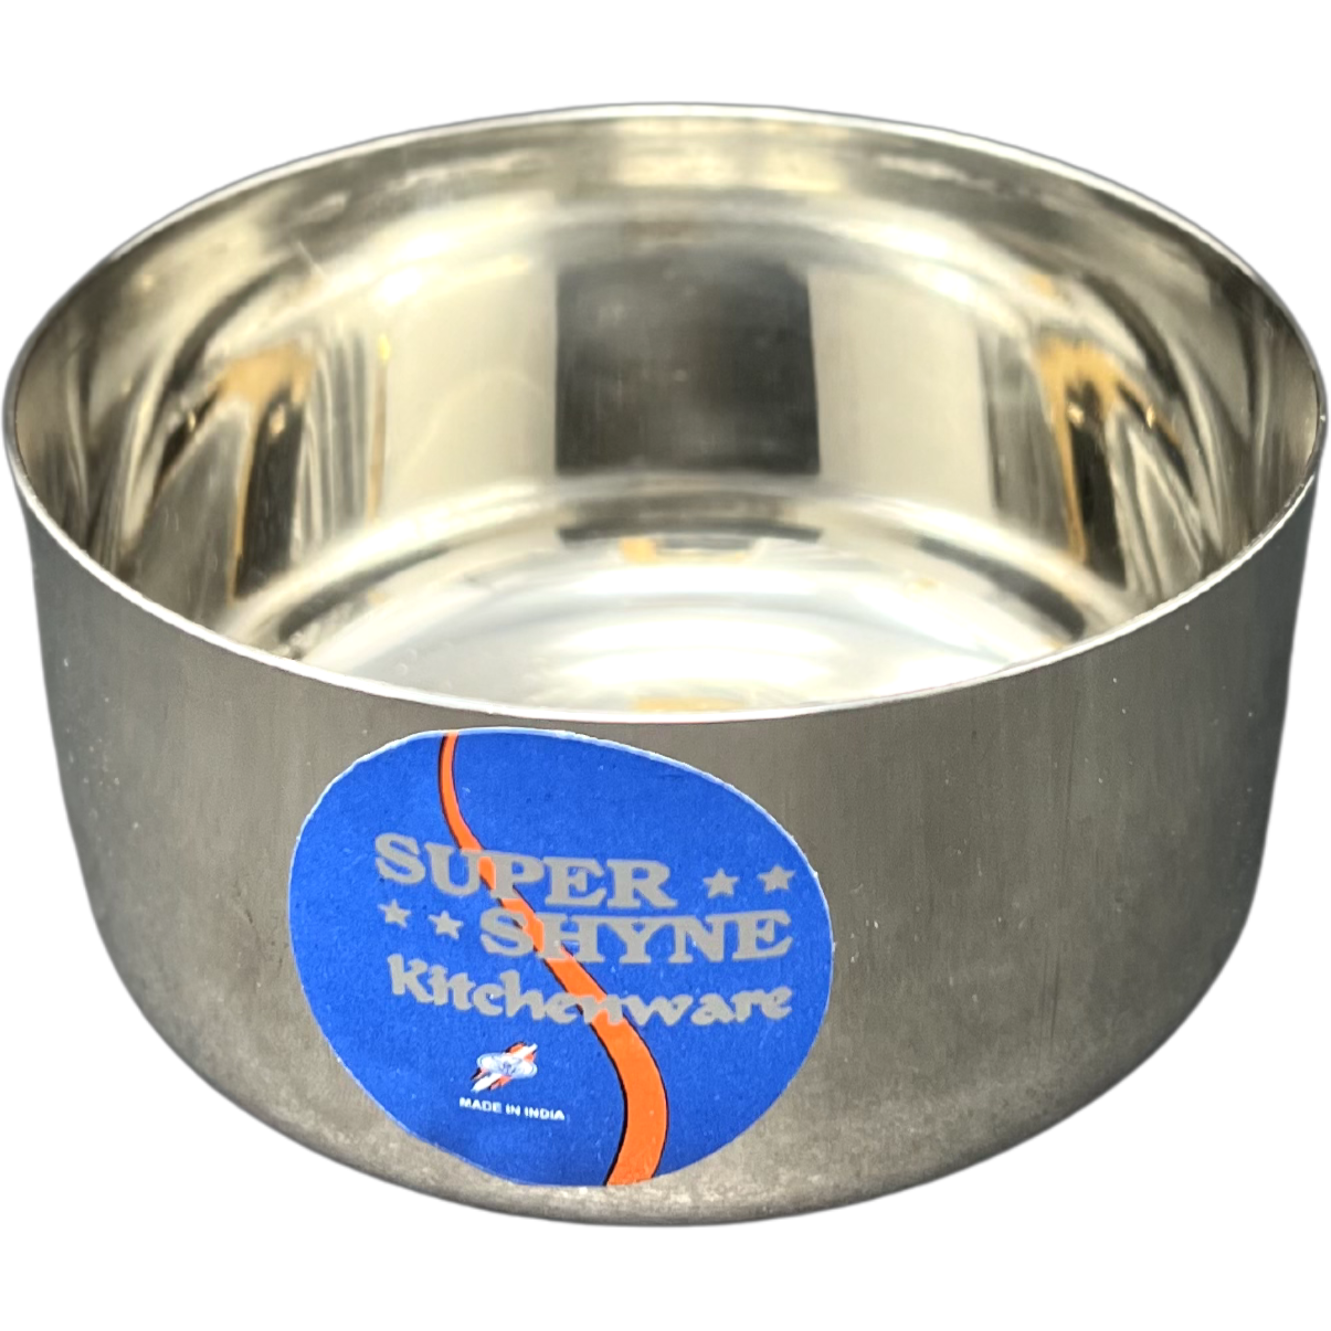 Super Shyne Stainless Steel Bowl Small - 3.5 Inch